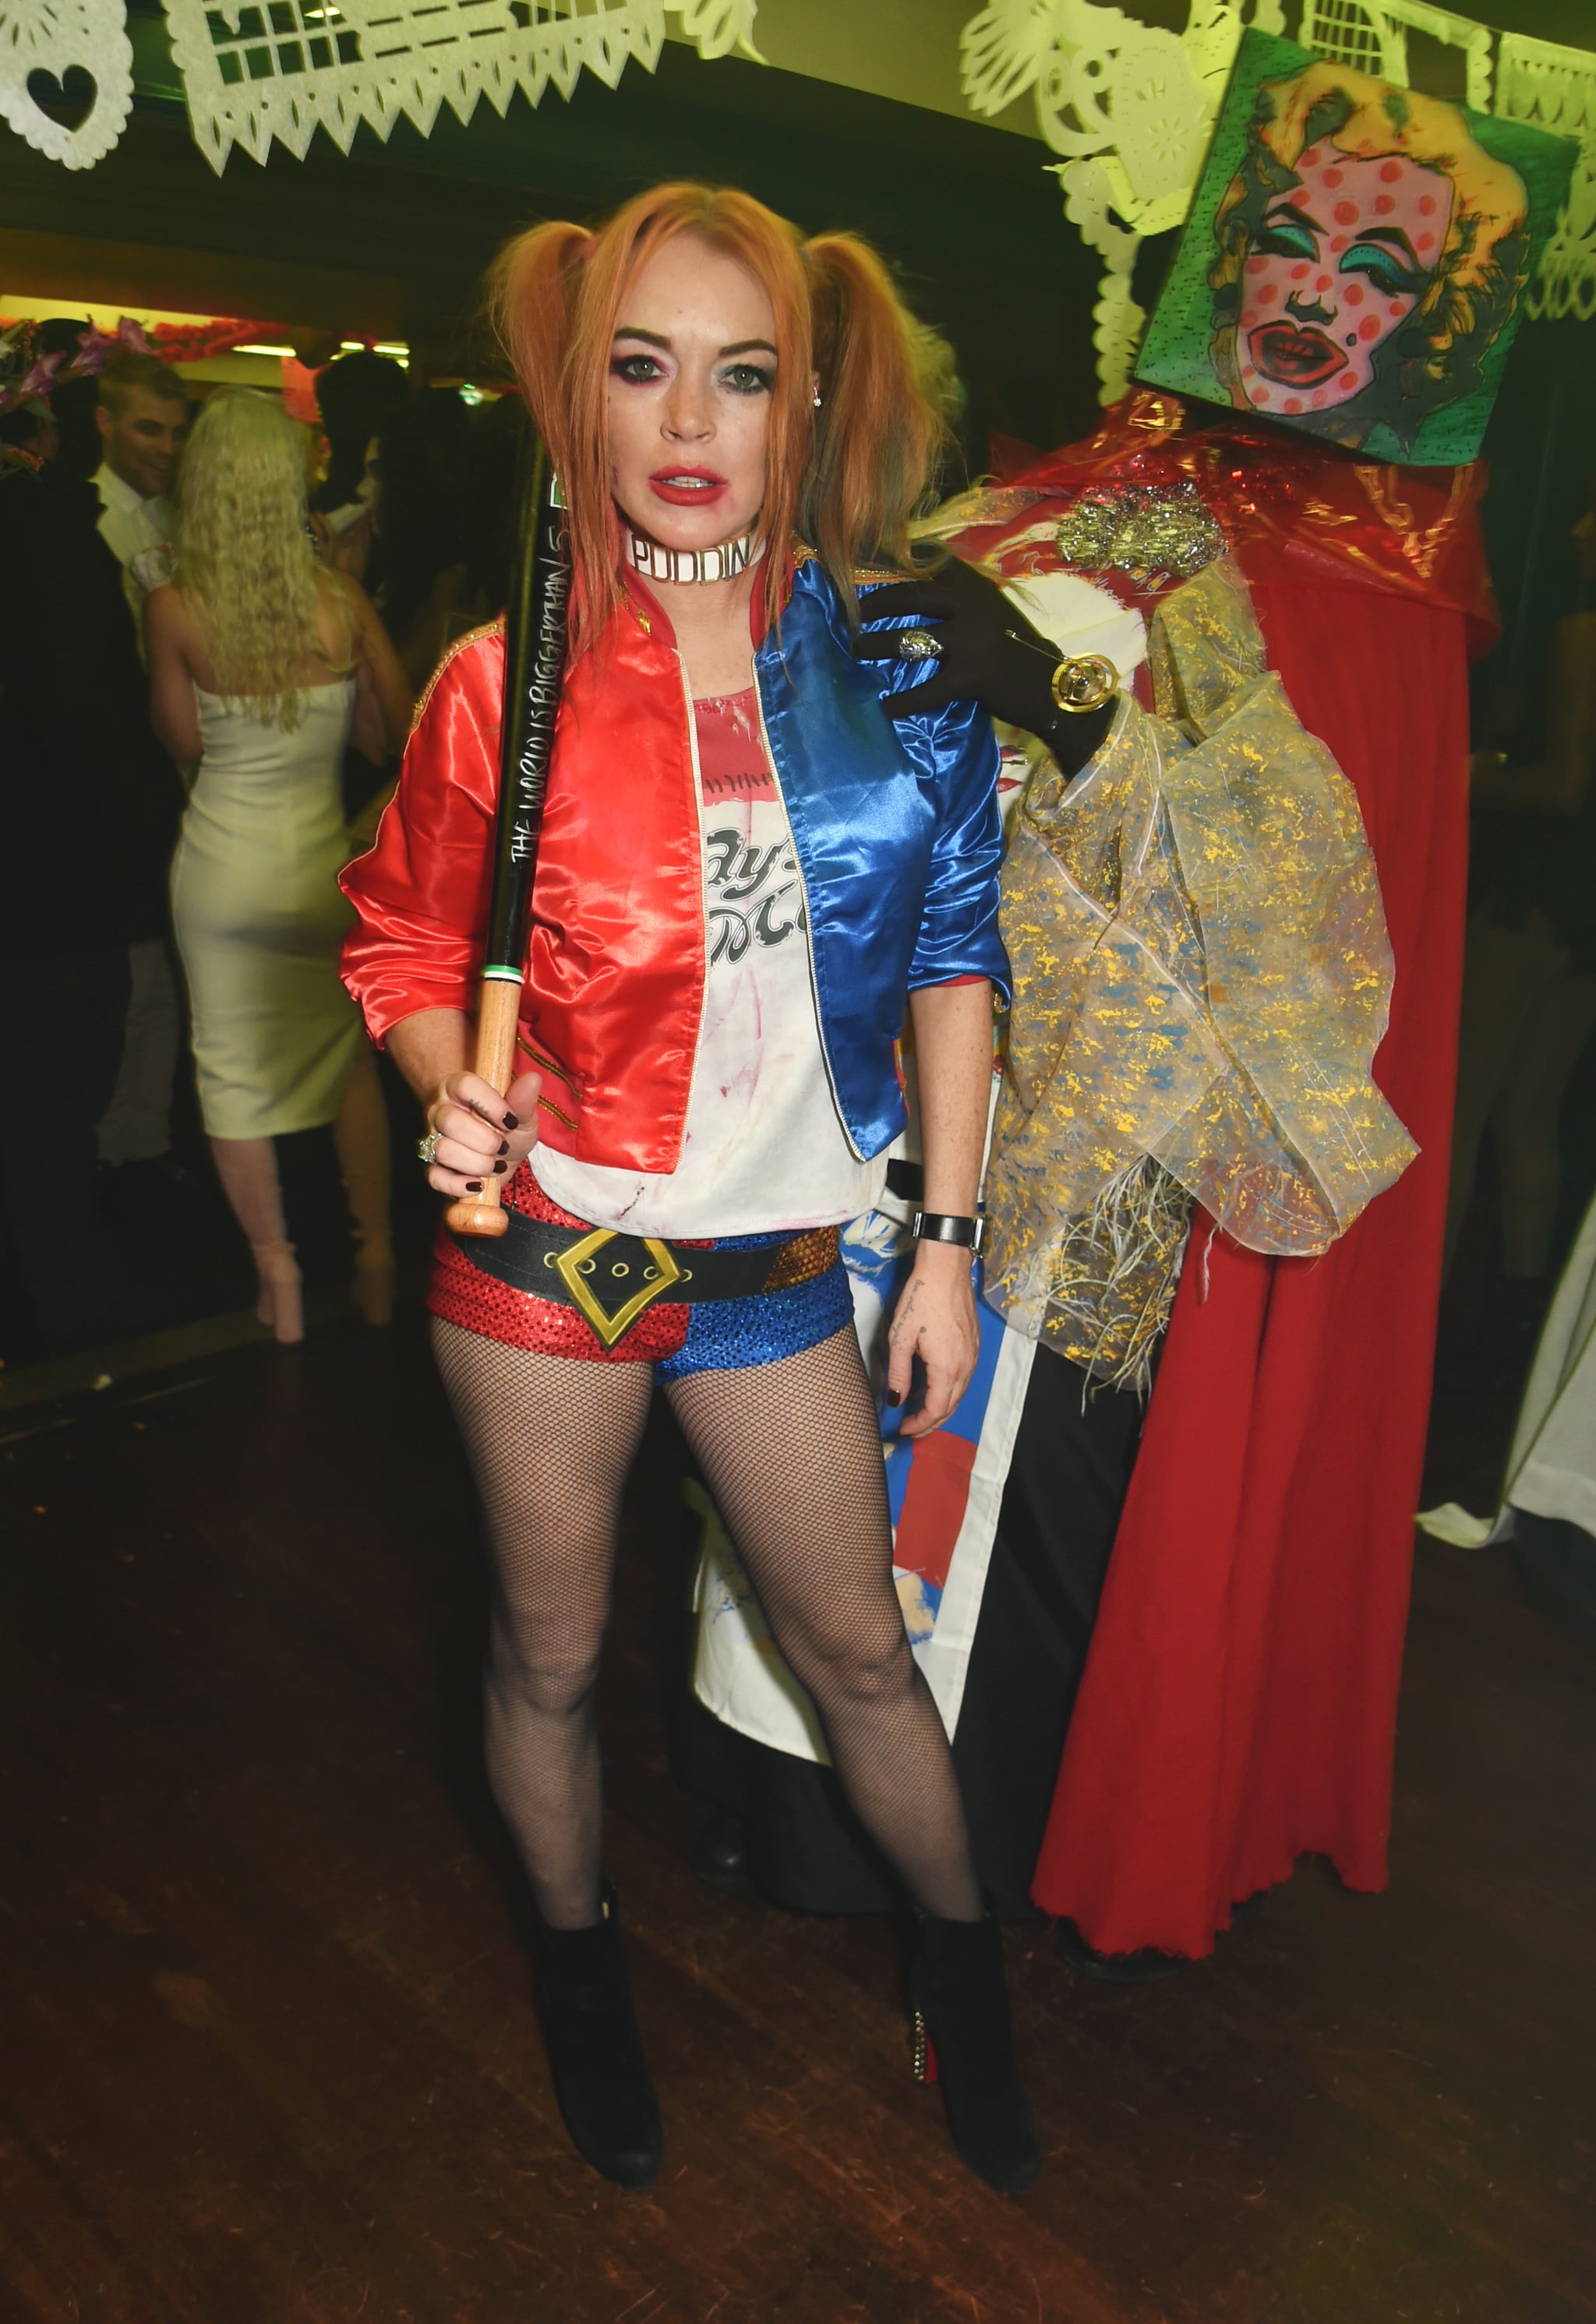 lindsay lohan as harley quinn from suicide squad look back on last year s sexy scary silly halloween costumes popsugar celebrity photo 142